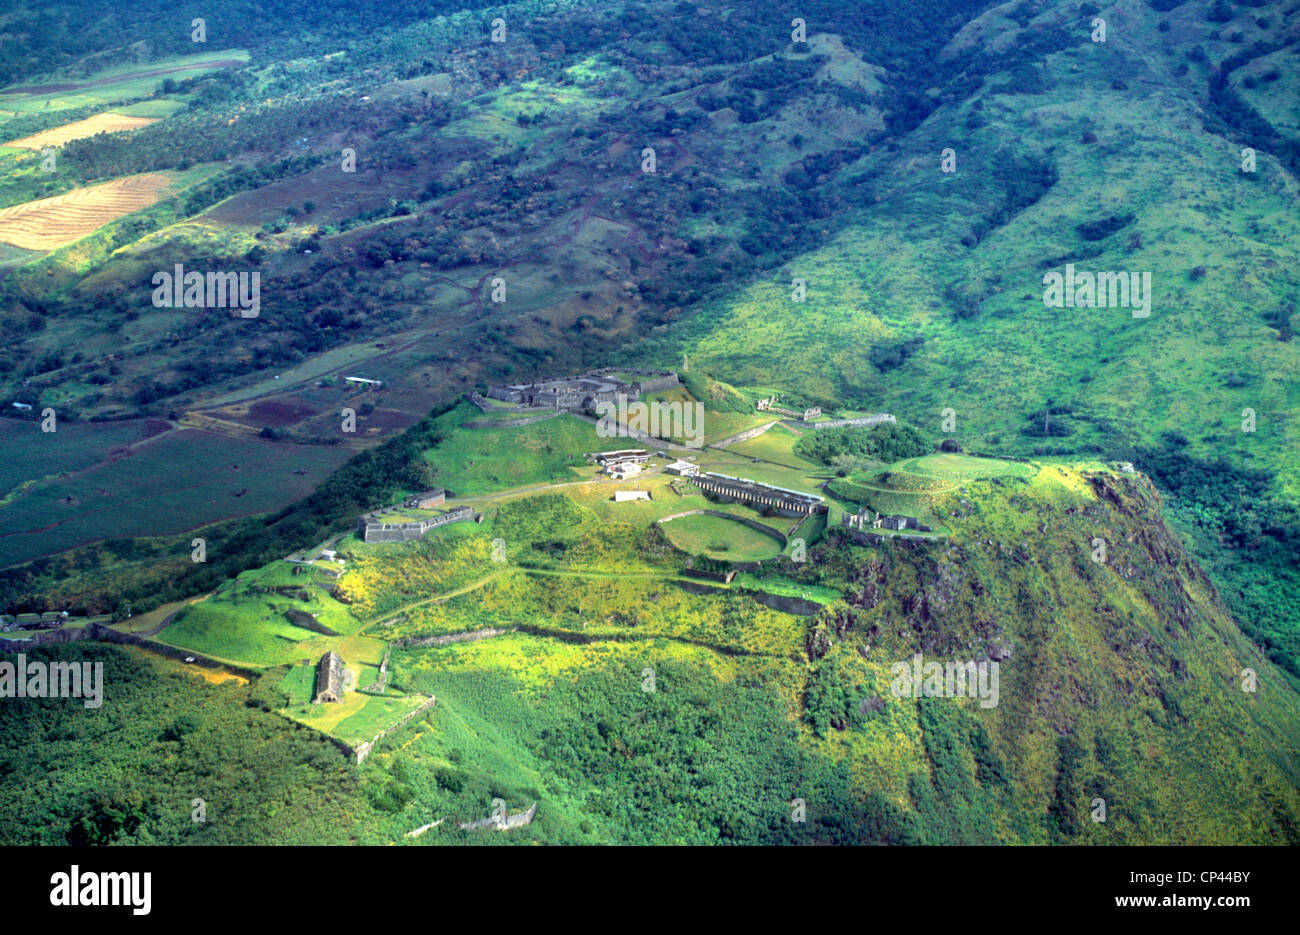 St Kitts Brimstone Hill Brimstone Fort Aerial View World Heritage Site Stock Photo